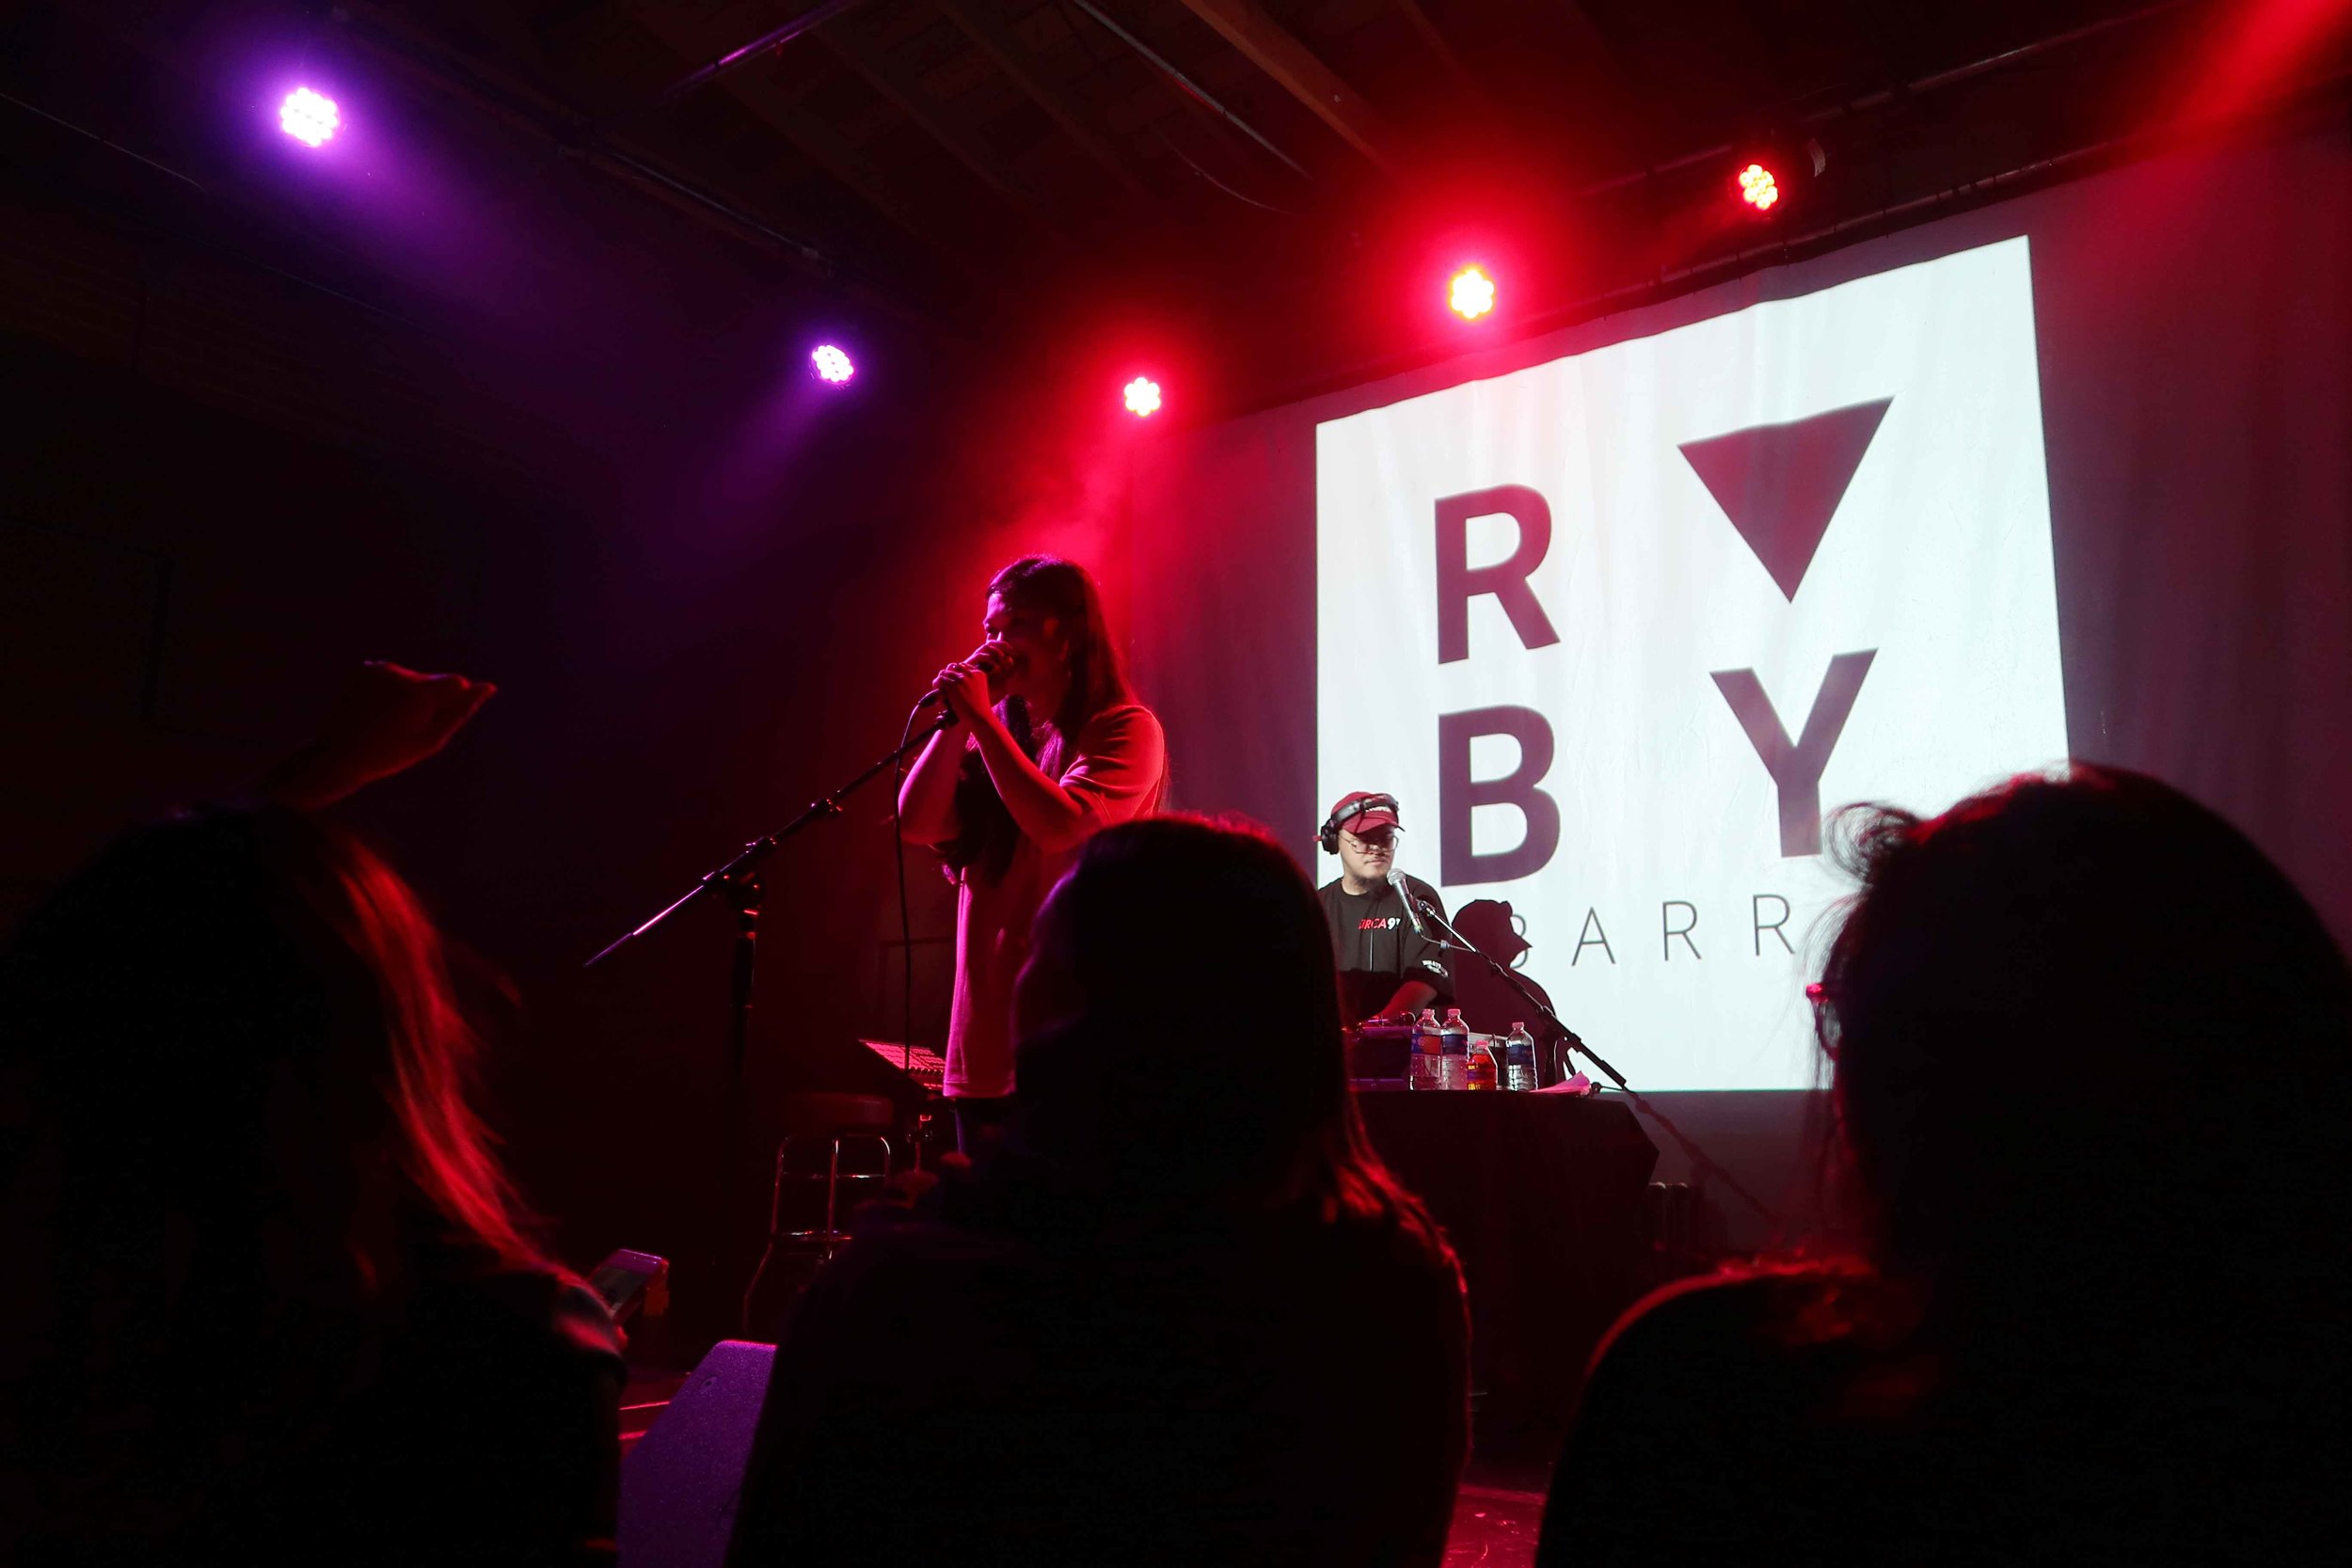  Ruby Ibarra in concert at the Bootleg Theater in Los Angeles’ Historic Filipinotown in January 2018. Photo by Paola Mardo. 